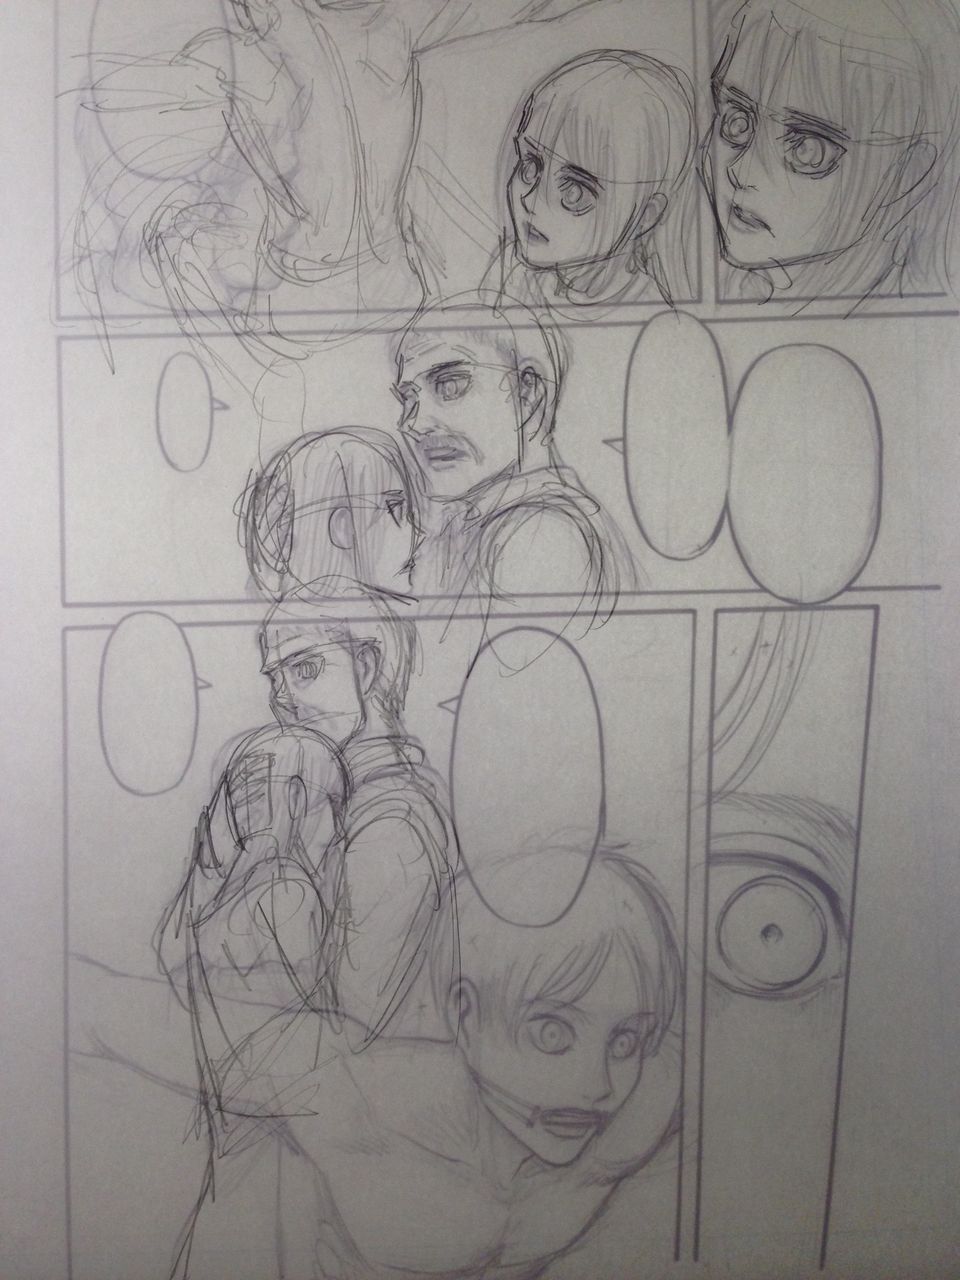  Isayama shares two manga panel sketches of SnK chapter 63 (Rod, Historia, Eren)